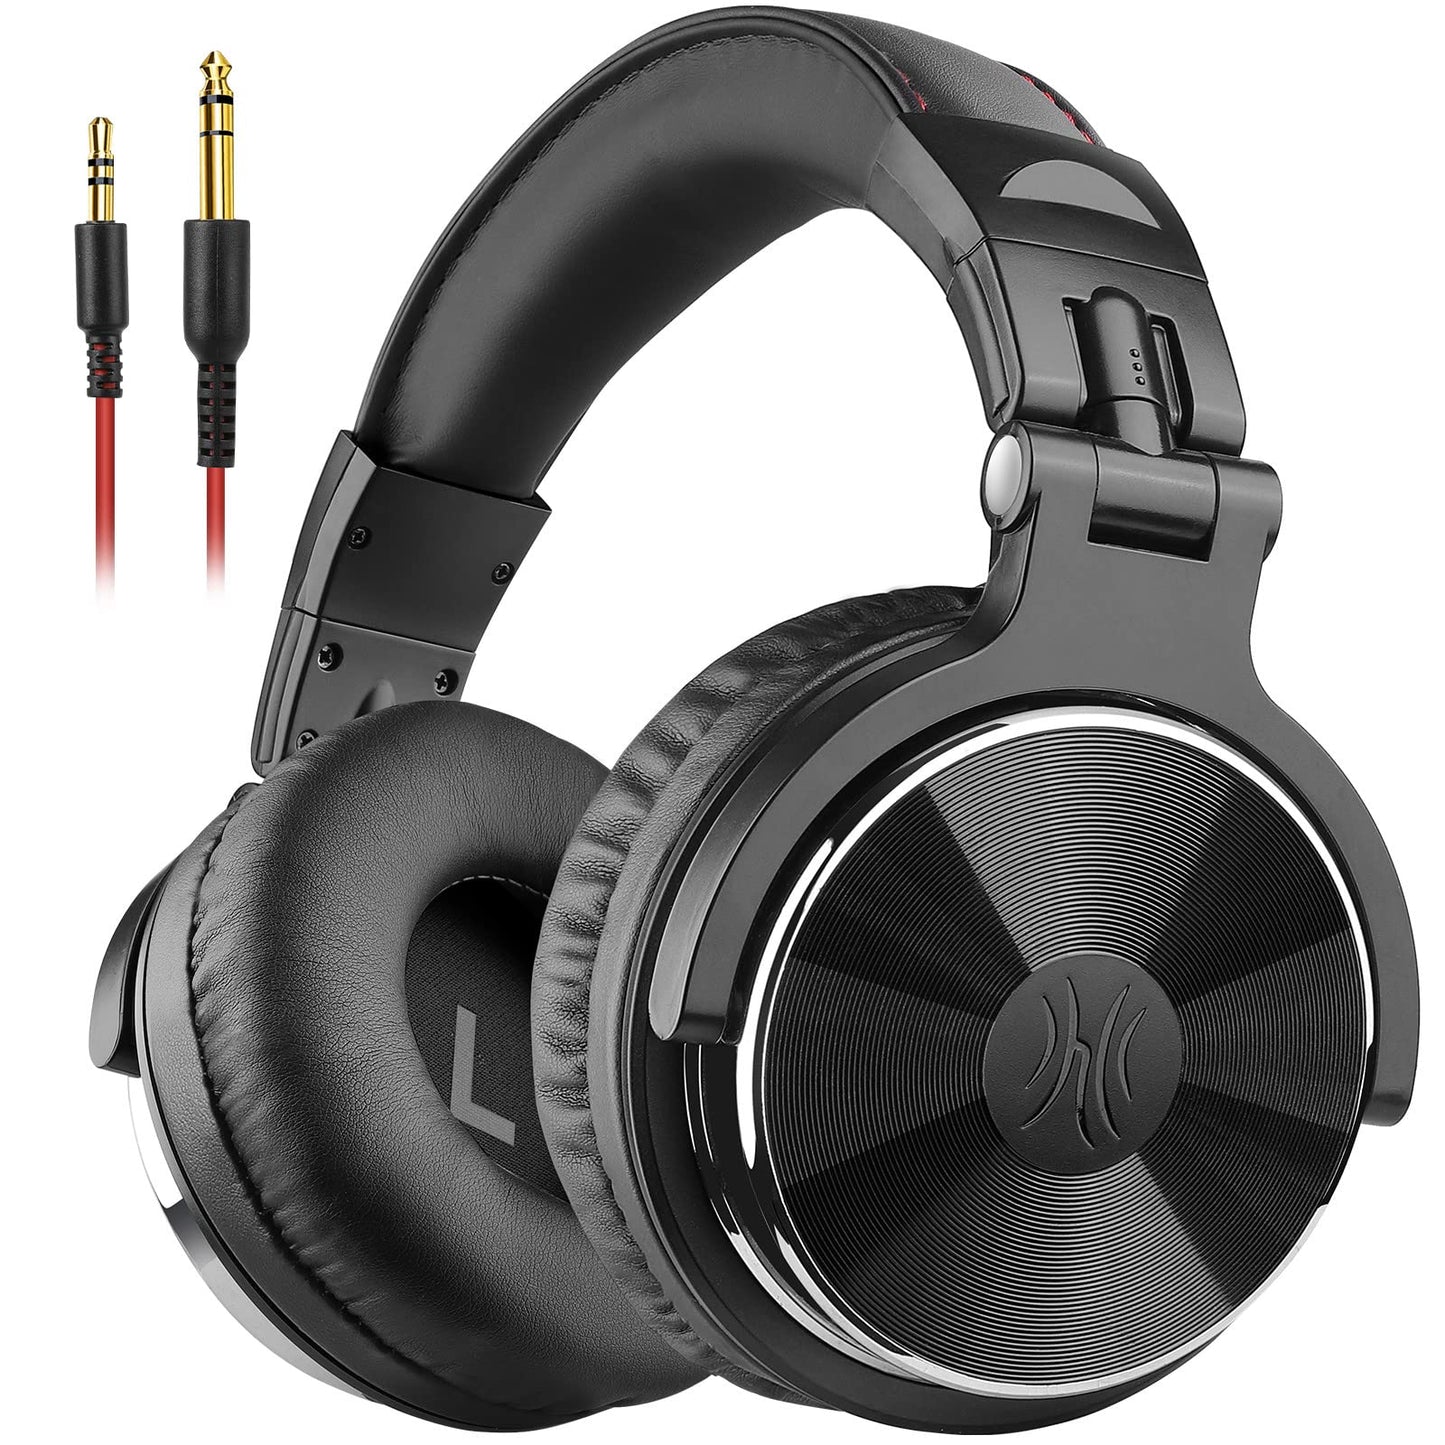 OneOdio Wired DJ Stereo Headsets Over Ear Headphones Studio Monitor & Mixing  with 50mm Neodymium Drivers and 1/4 to 3.5mm Jack for AMP Computer Recording Podcast Keyboard Guitar Laptop - Black - Opticdeals